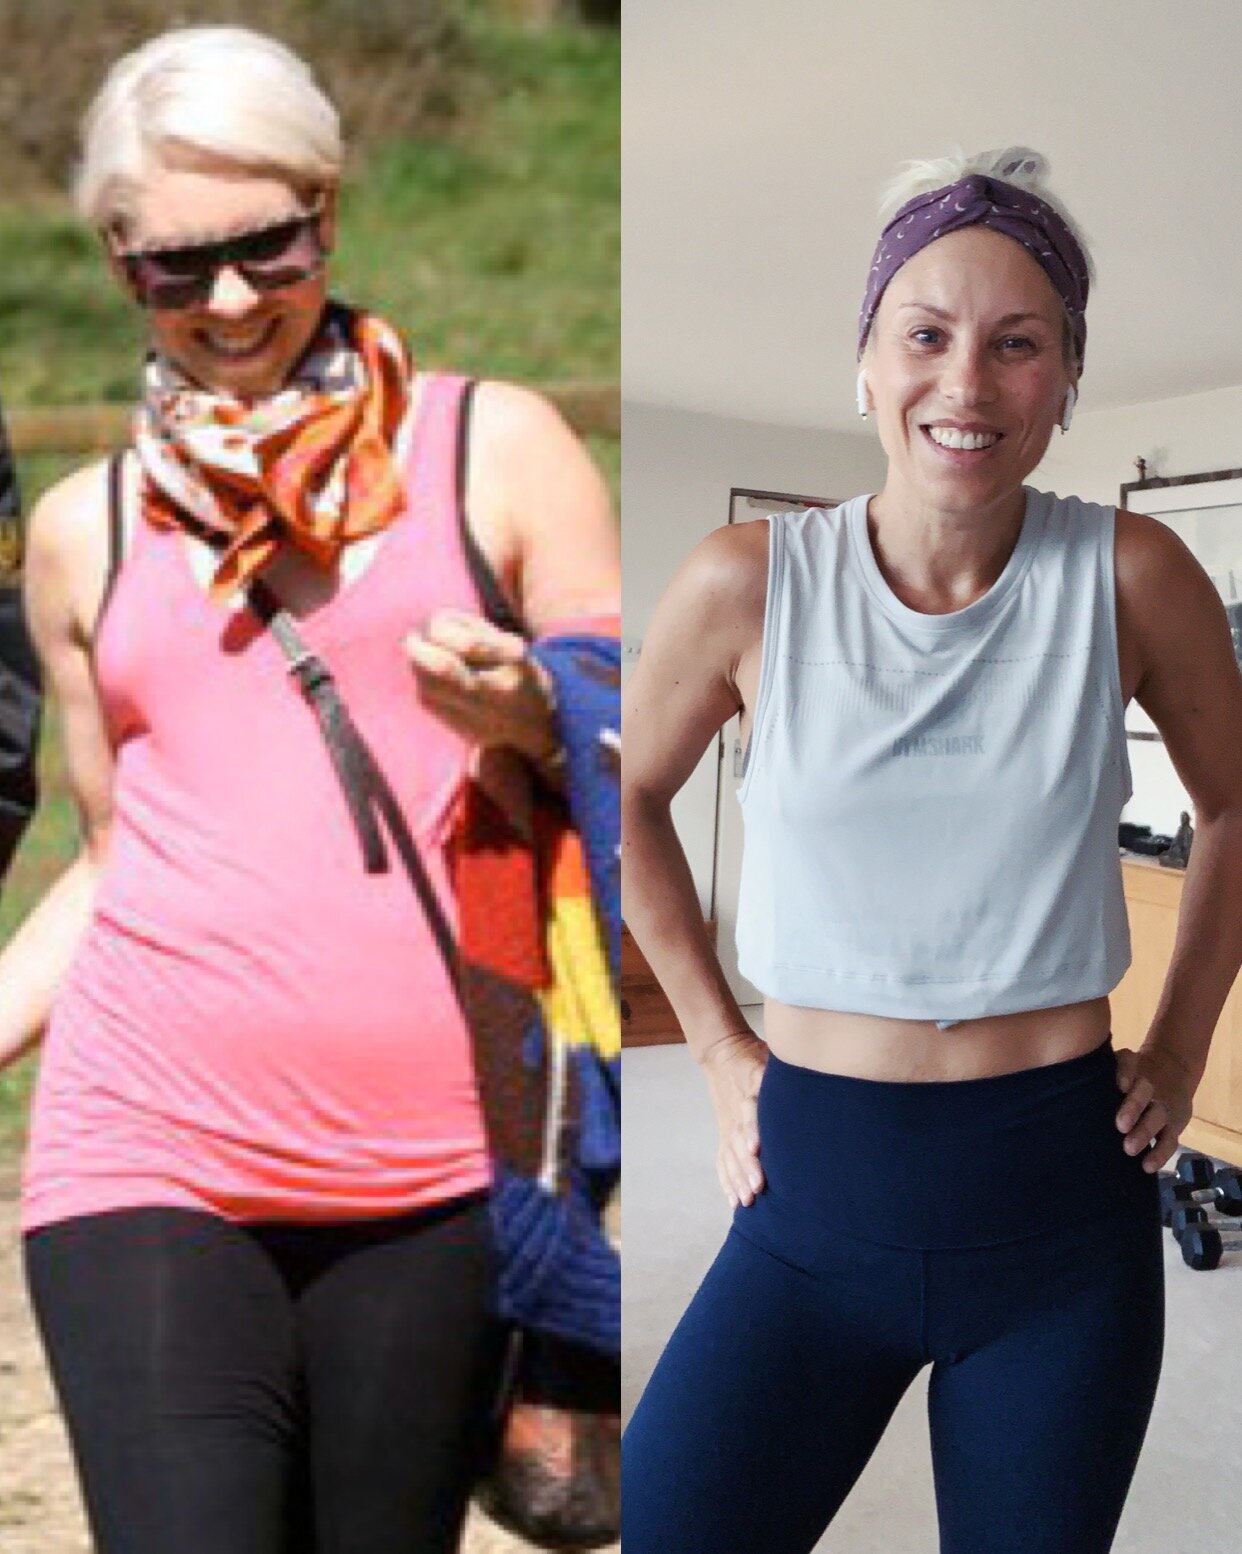 Emma before and after her fitness journey. Photo: Emma Karney